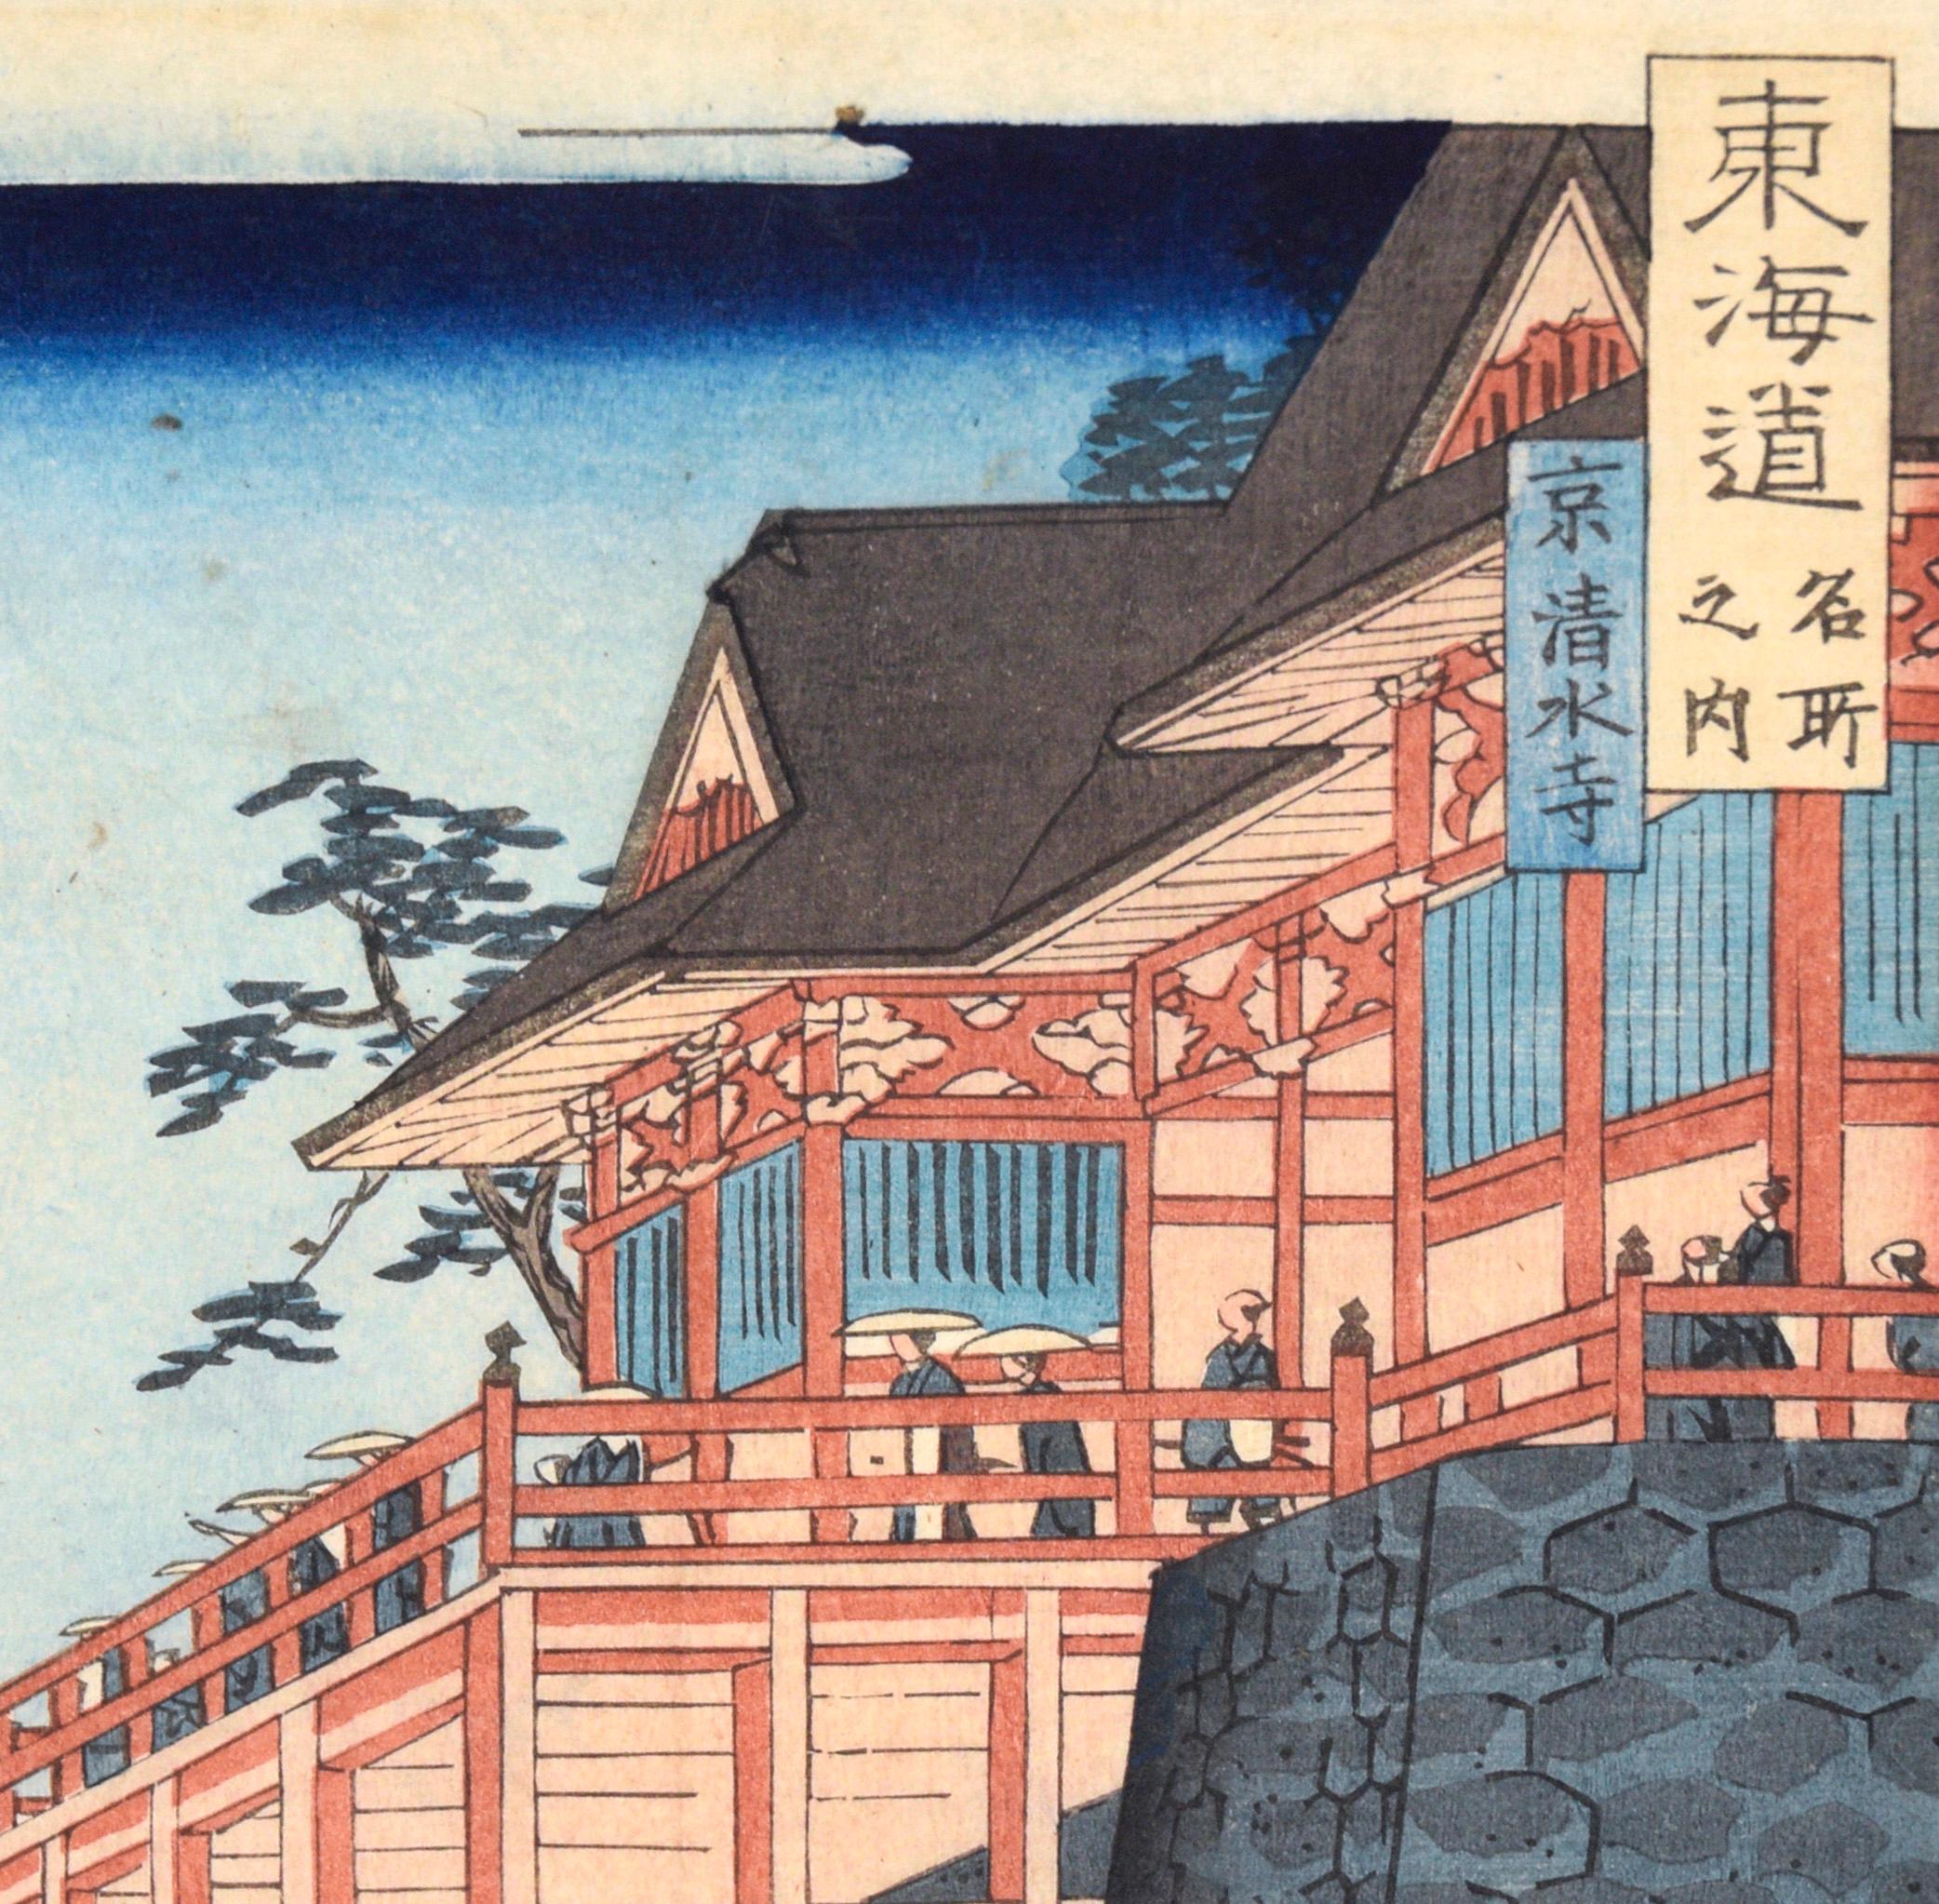 Kiyomizu Temple, Scenes of Famous Places along Tôkaidô Road - Woodblock on Paper

Full Title:
Kyoto: Kiyomizu Temple (Kyô Kiyomizudera), from the series Scenes of Famous Places along the Tôkaidô Road (Tôkaidô meisho fûkei), also known as the